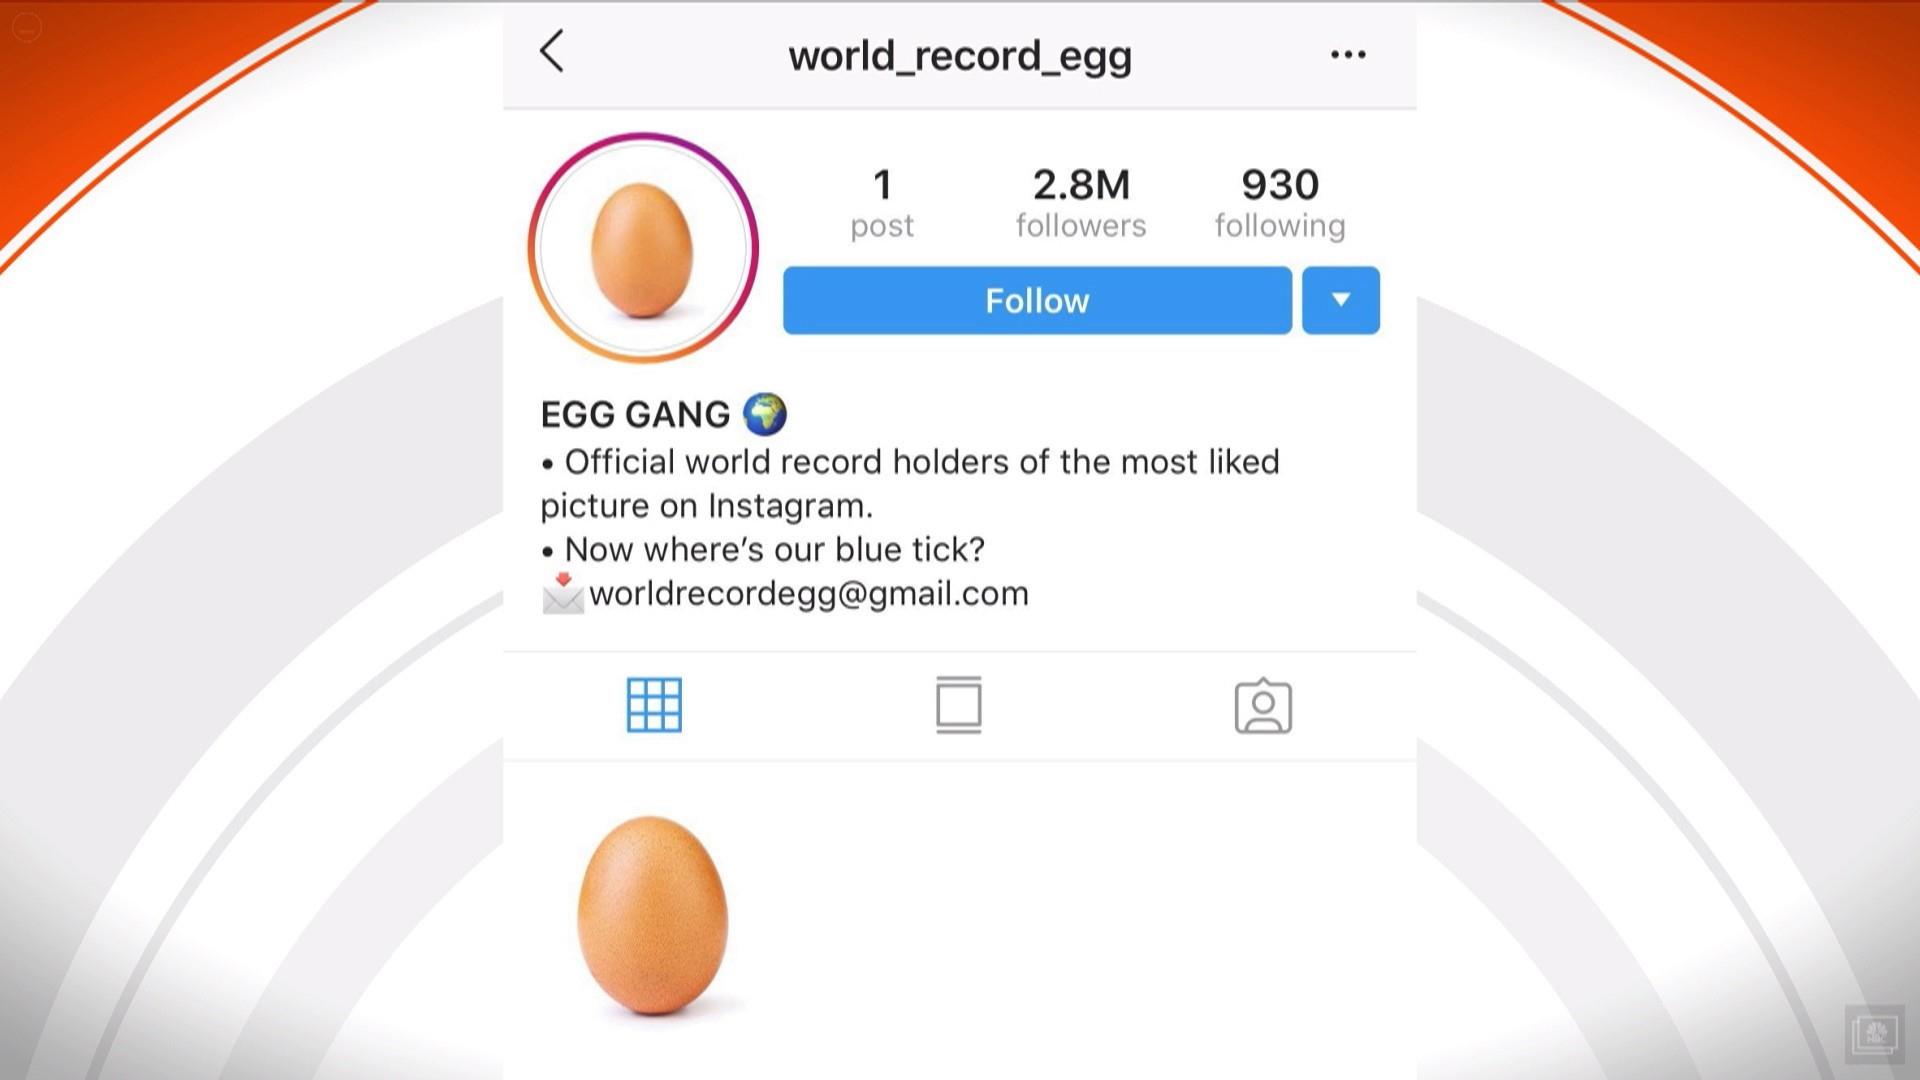 How & Why The World Record Egg Is The Most Popular Photo Ever